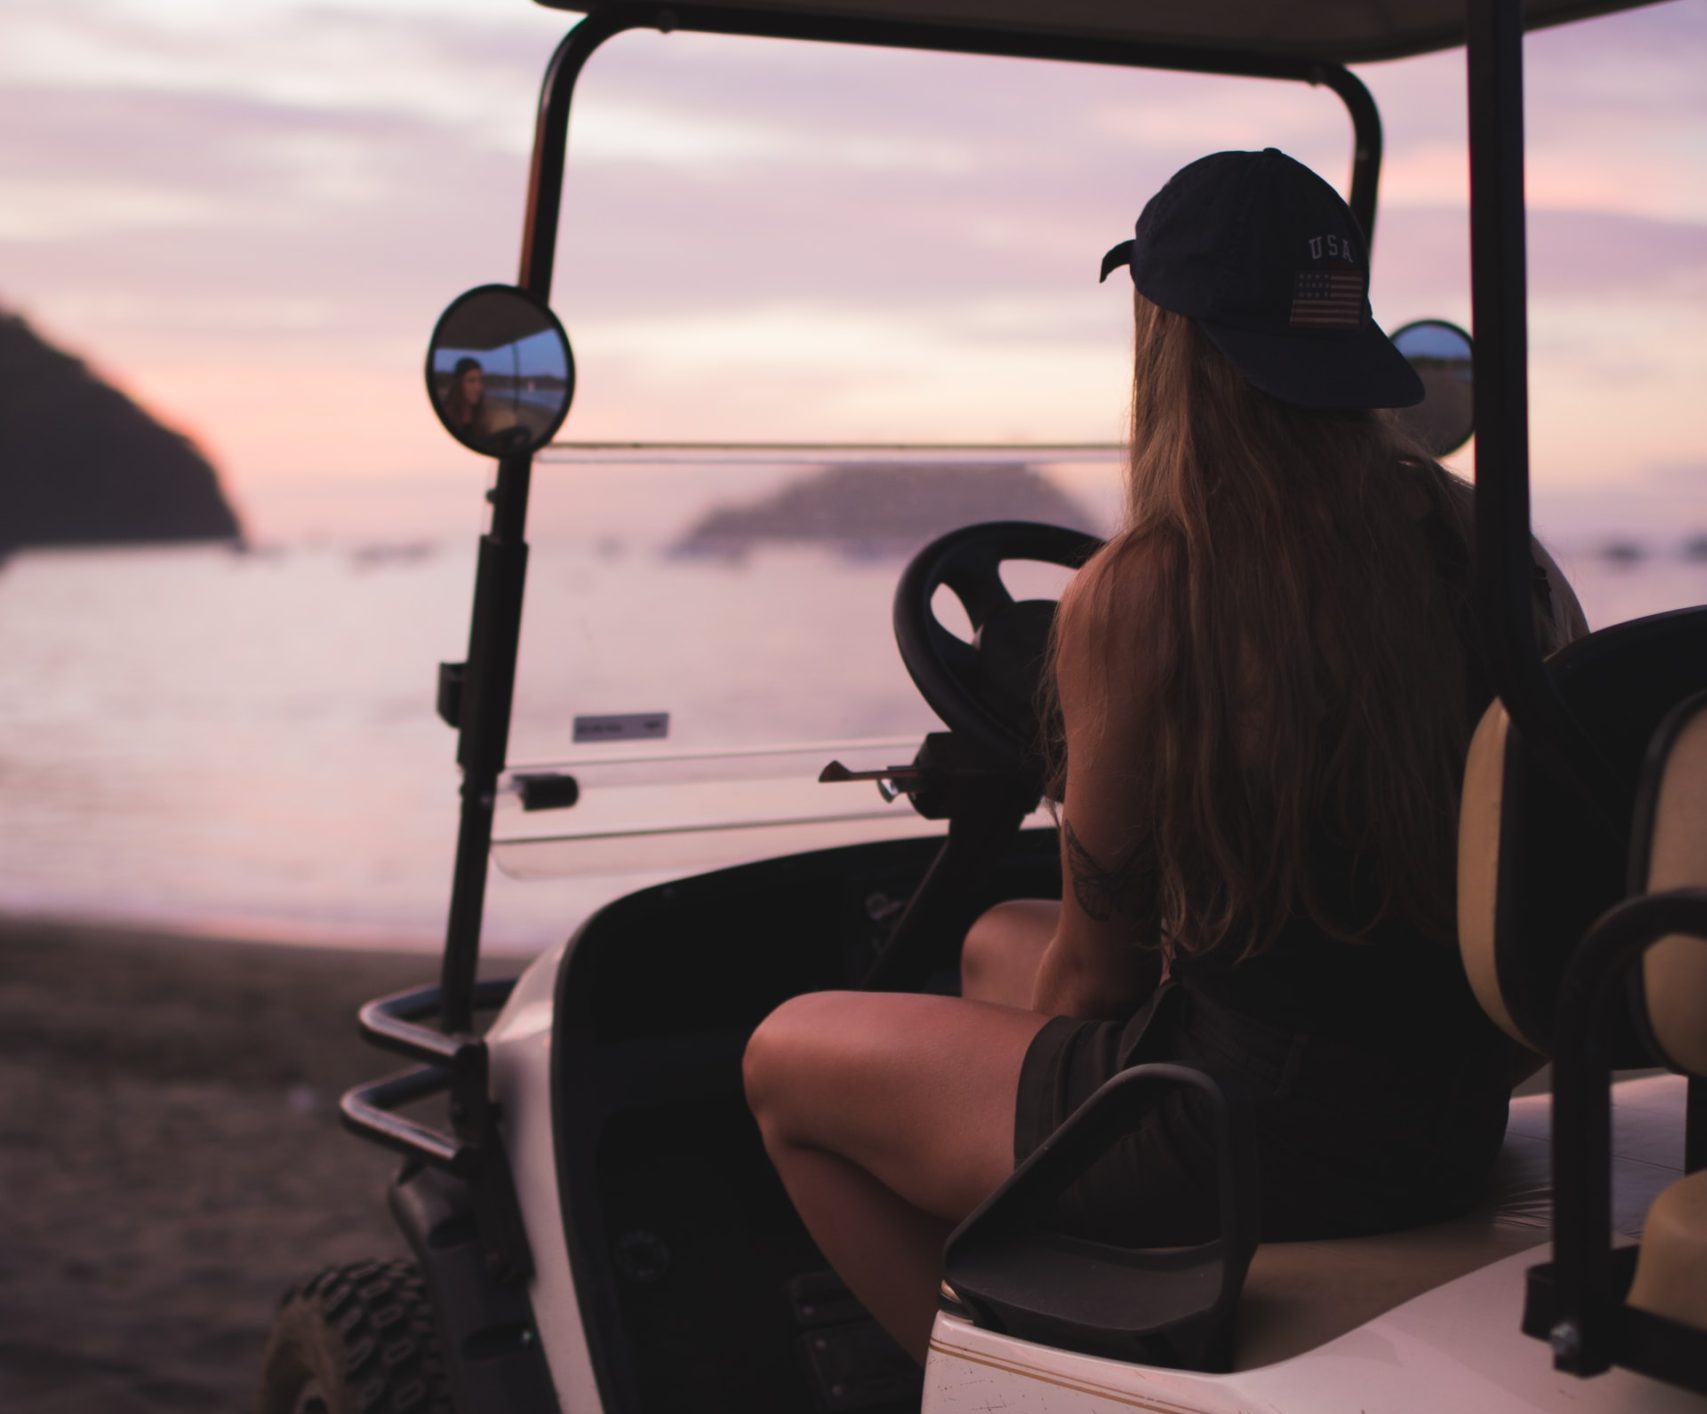 Golf Cart vs ATV: Which Is the Smarter Choice?